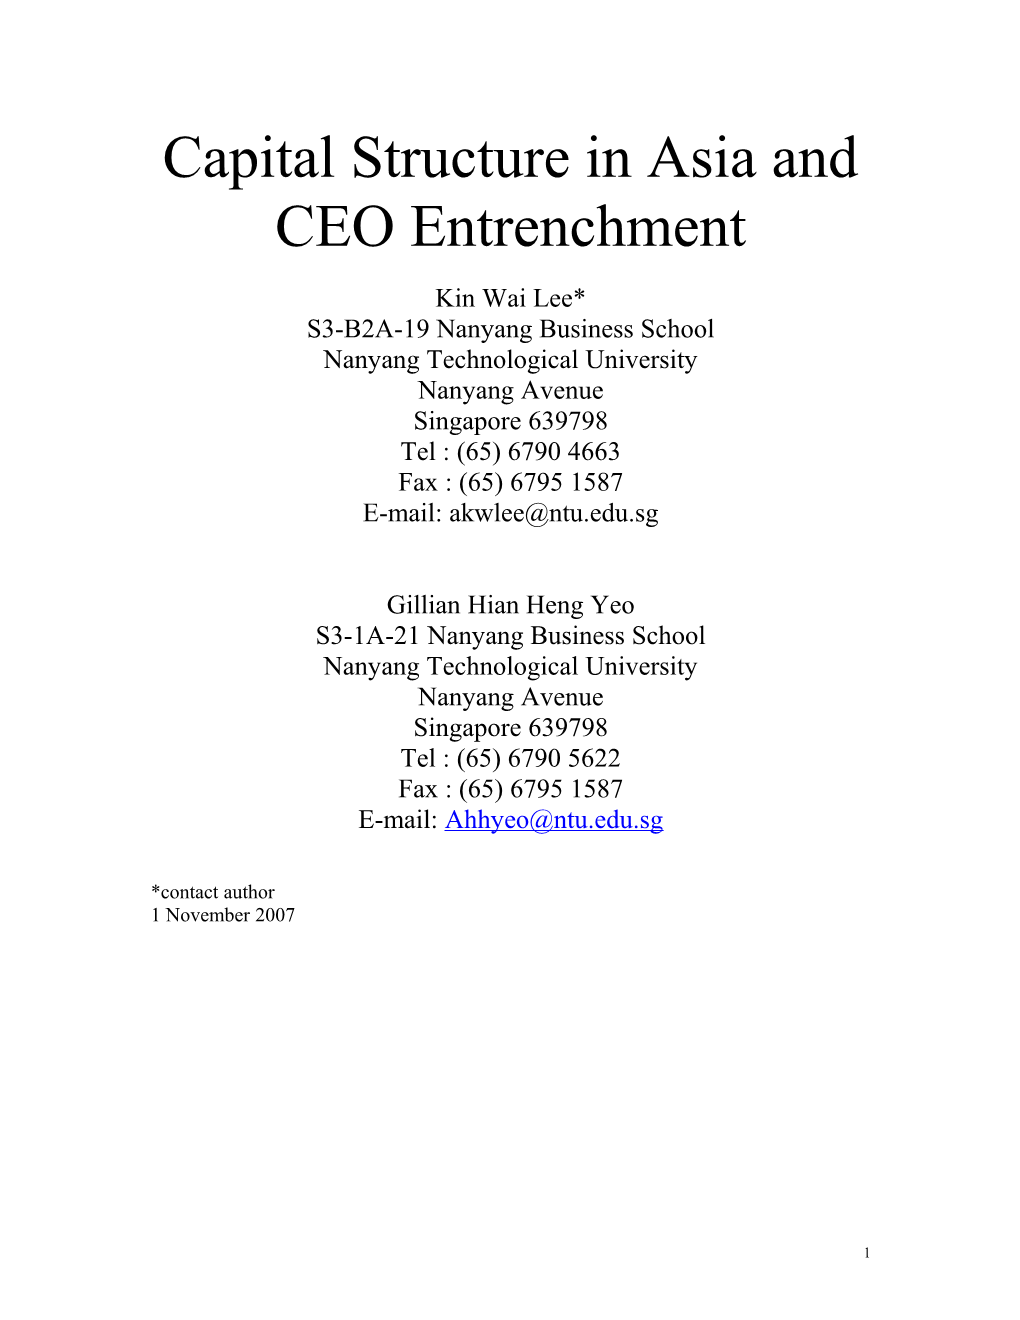 Capital Structure in Asia and CEO Entrenchment